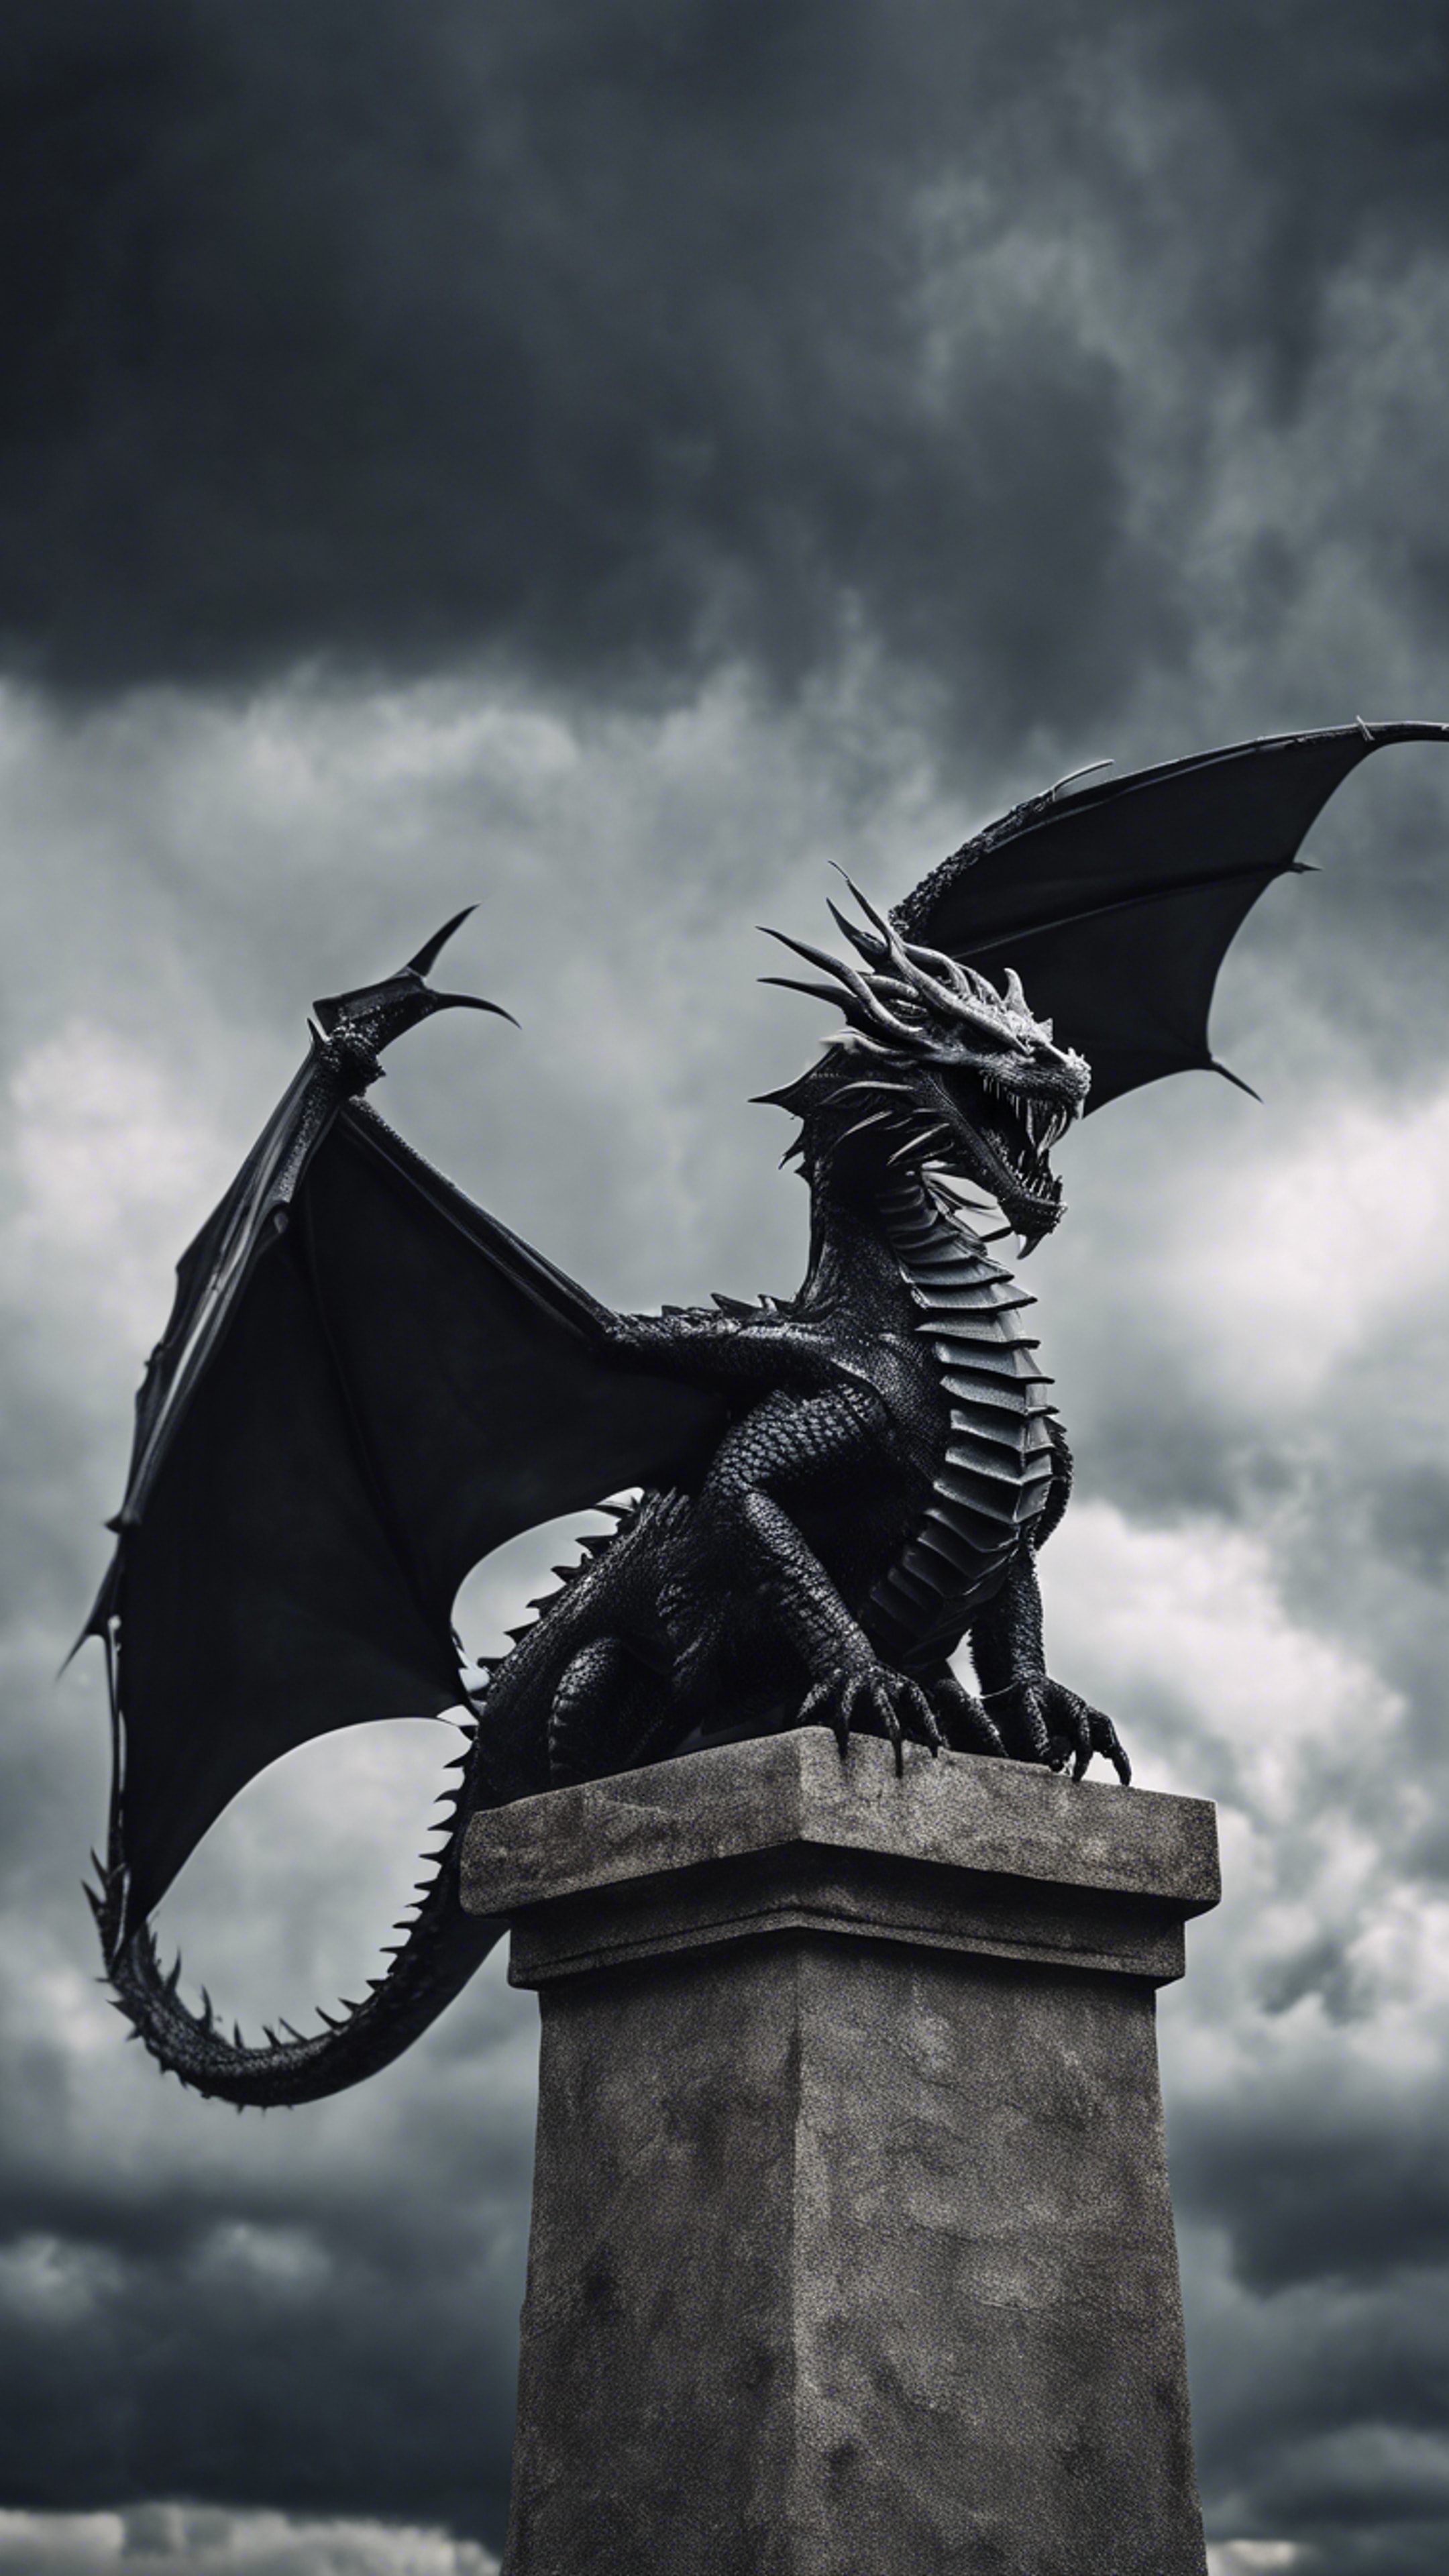 A gothic-style, black iron dragon flying amidst stormy, dark clouds. Tapet[aebeaee8cf654a26baba]